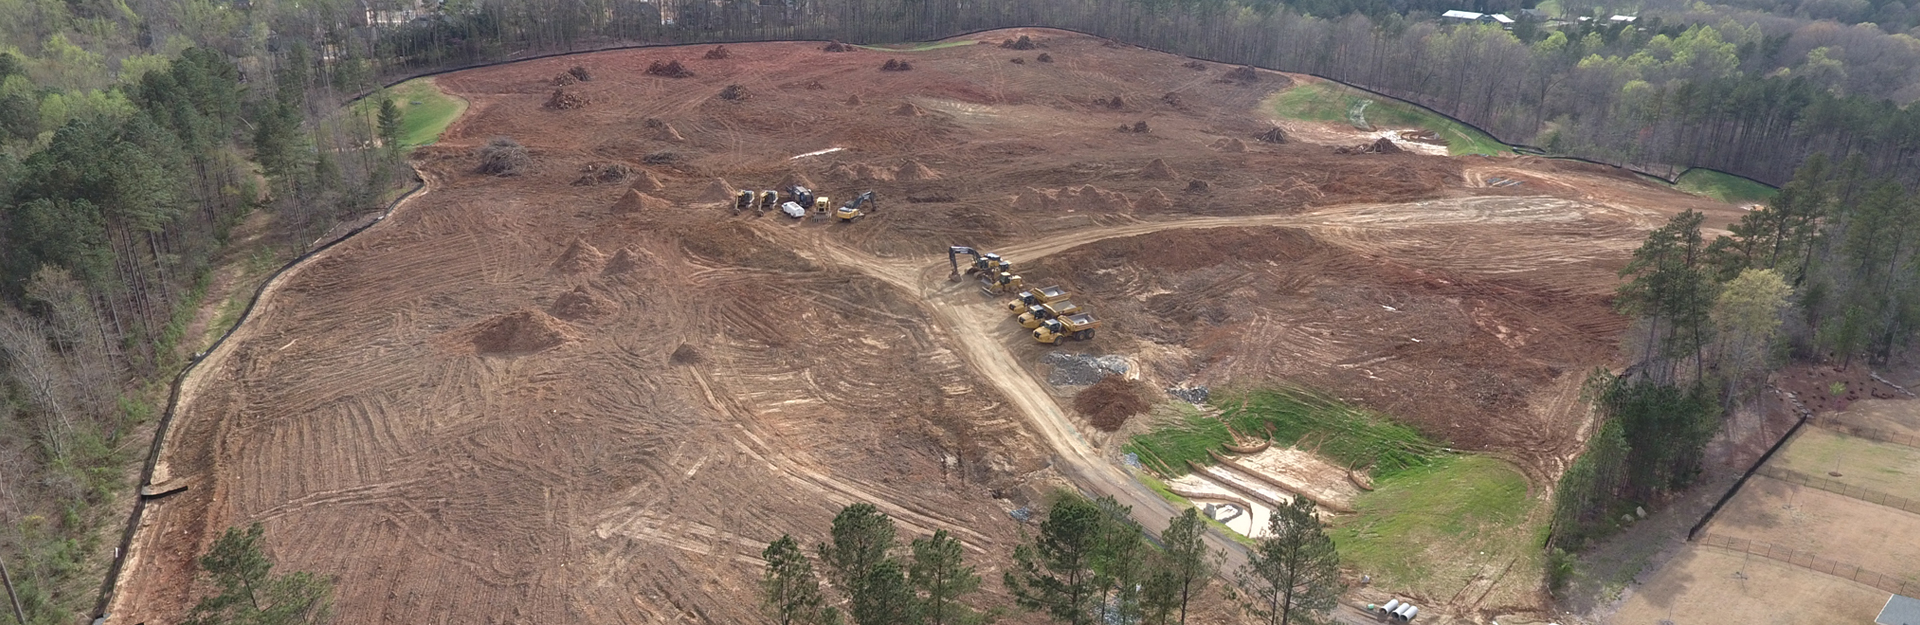 aerial view of a large construction site with exposed soil and work trucks